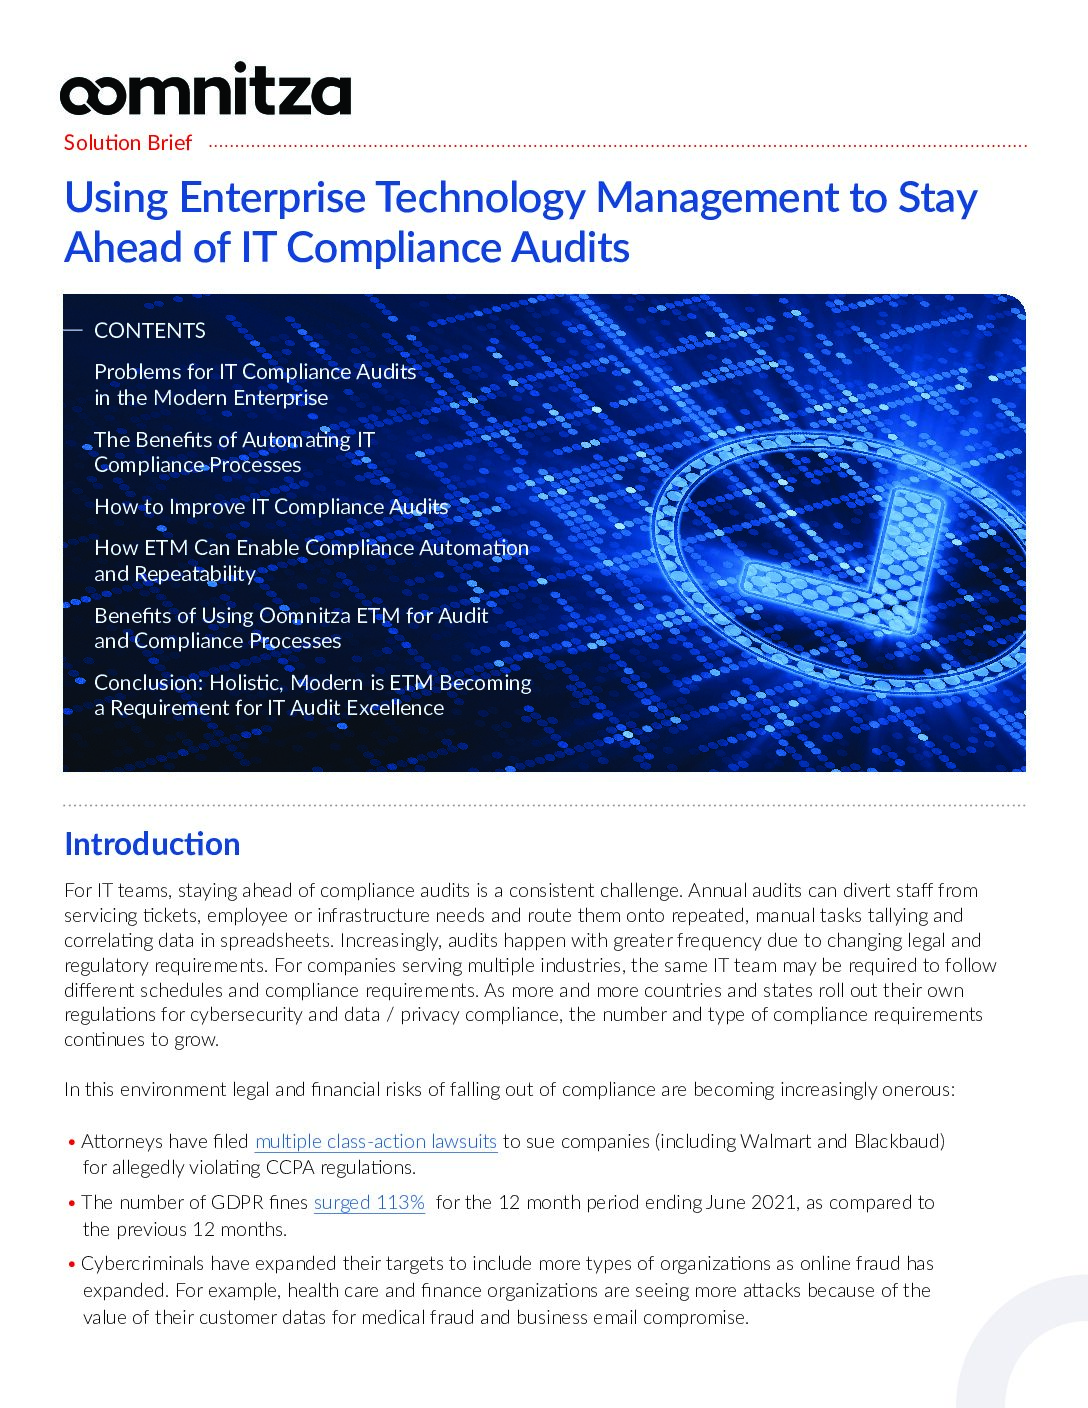 Featured image for Using Enterprise Technology Management to Stay Ahead of IT Compliance Audits